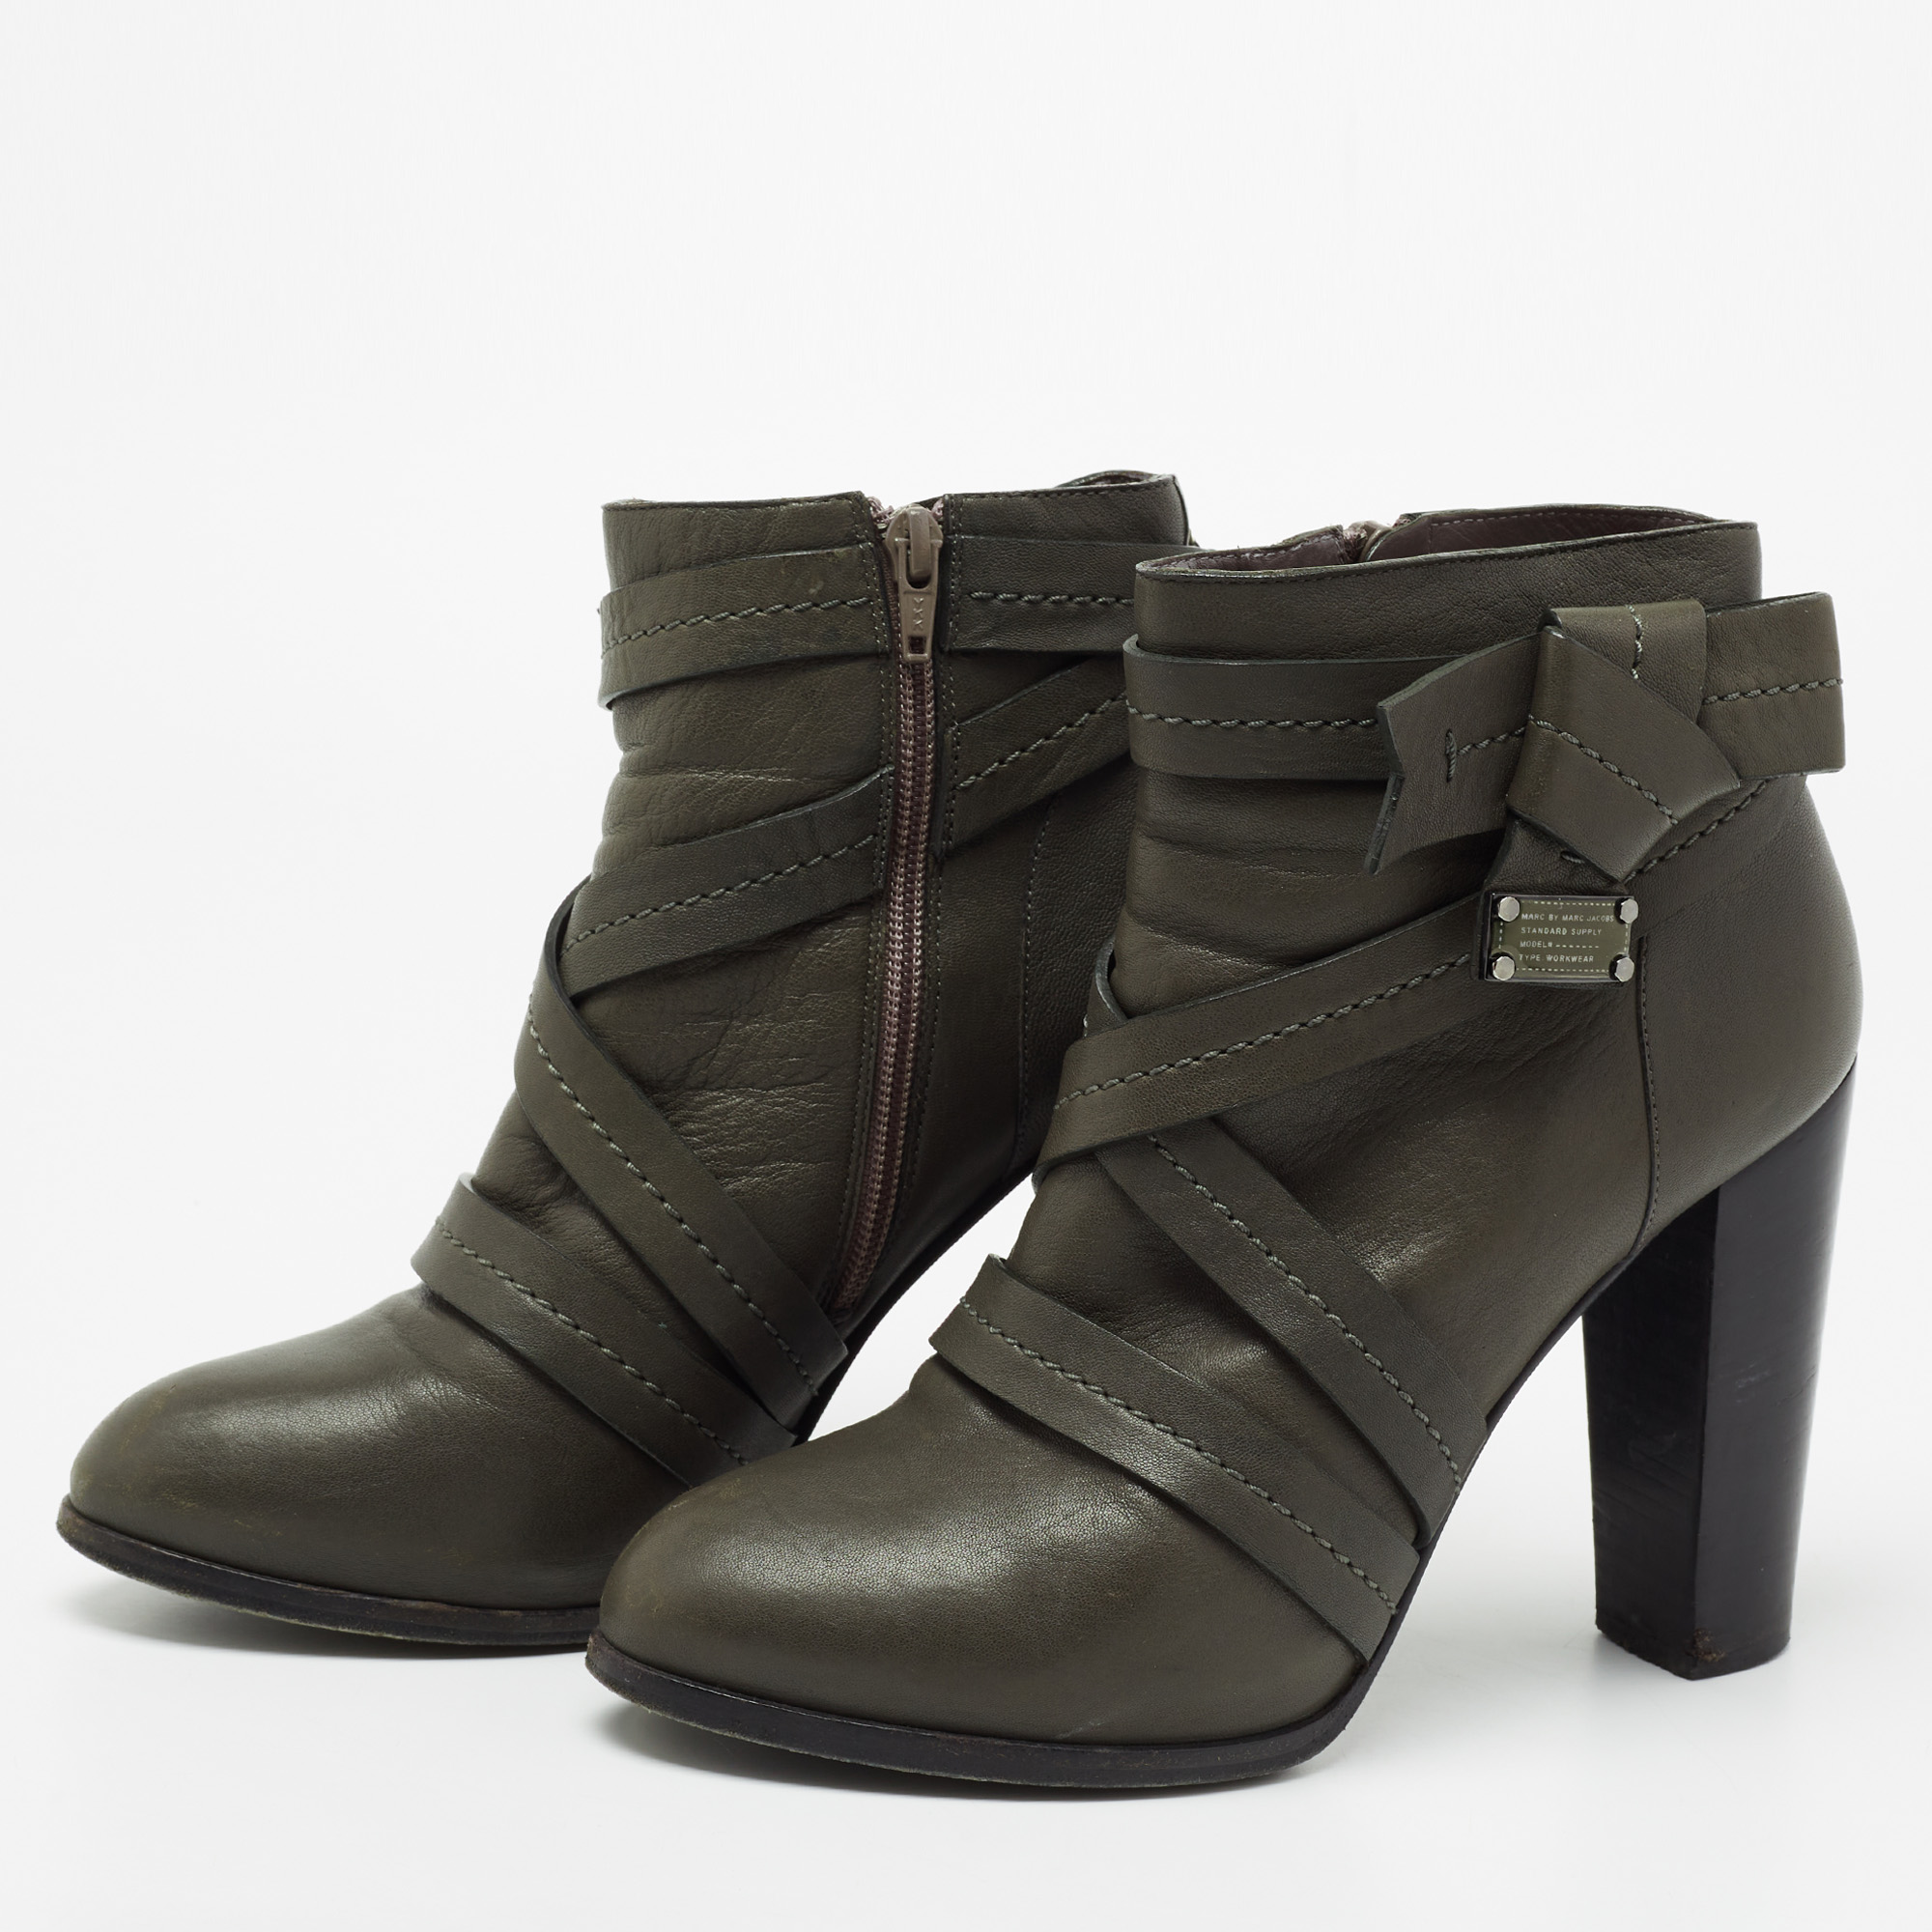 

Marc by Marc Jacobs Dark Green Leather Strappy Ankle Booties Size